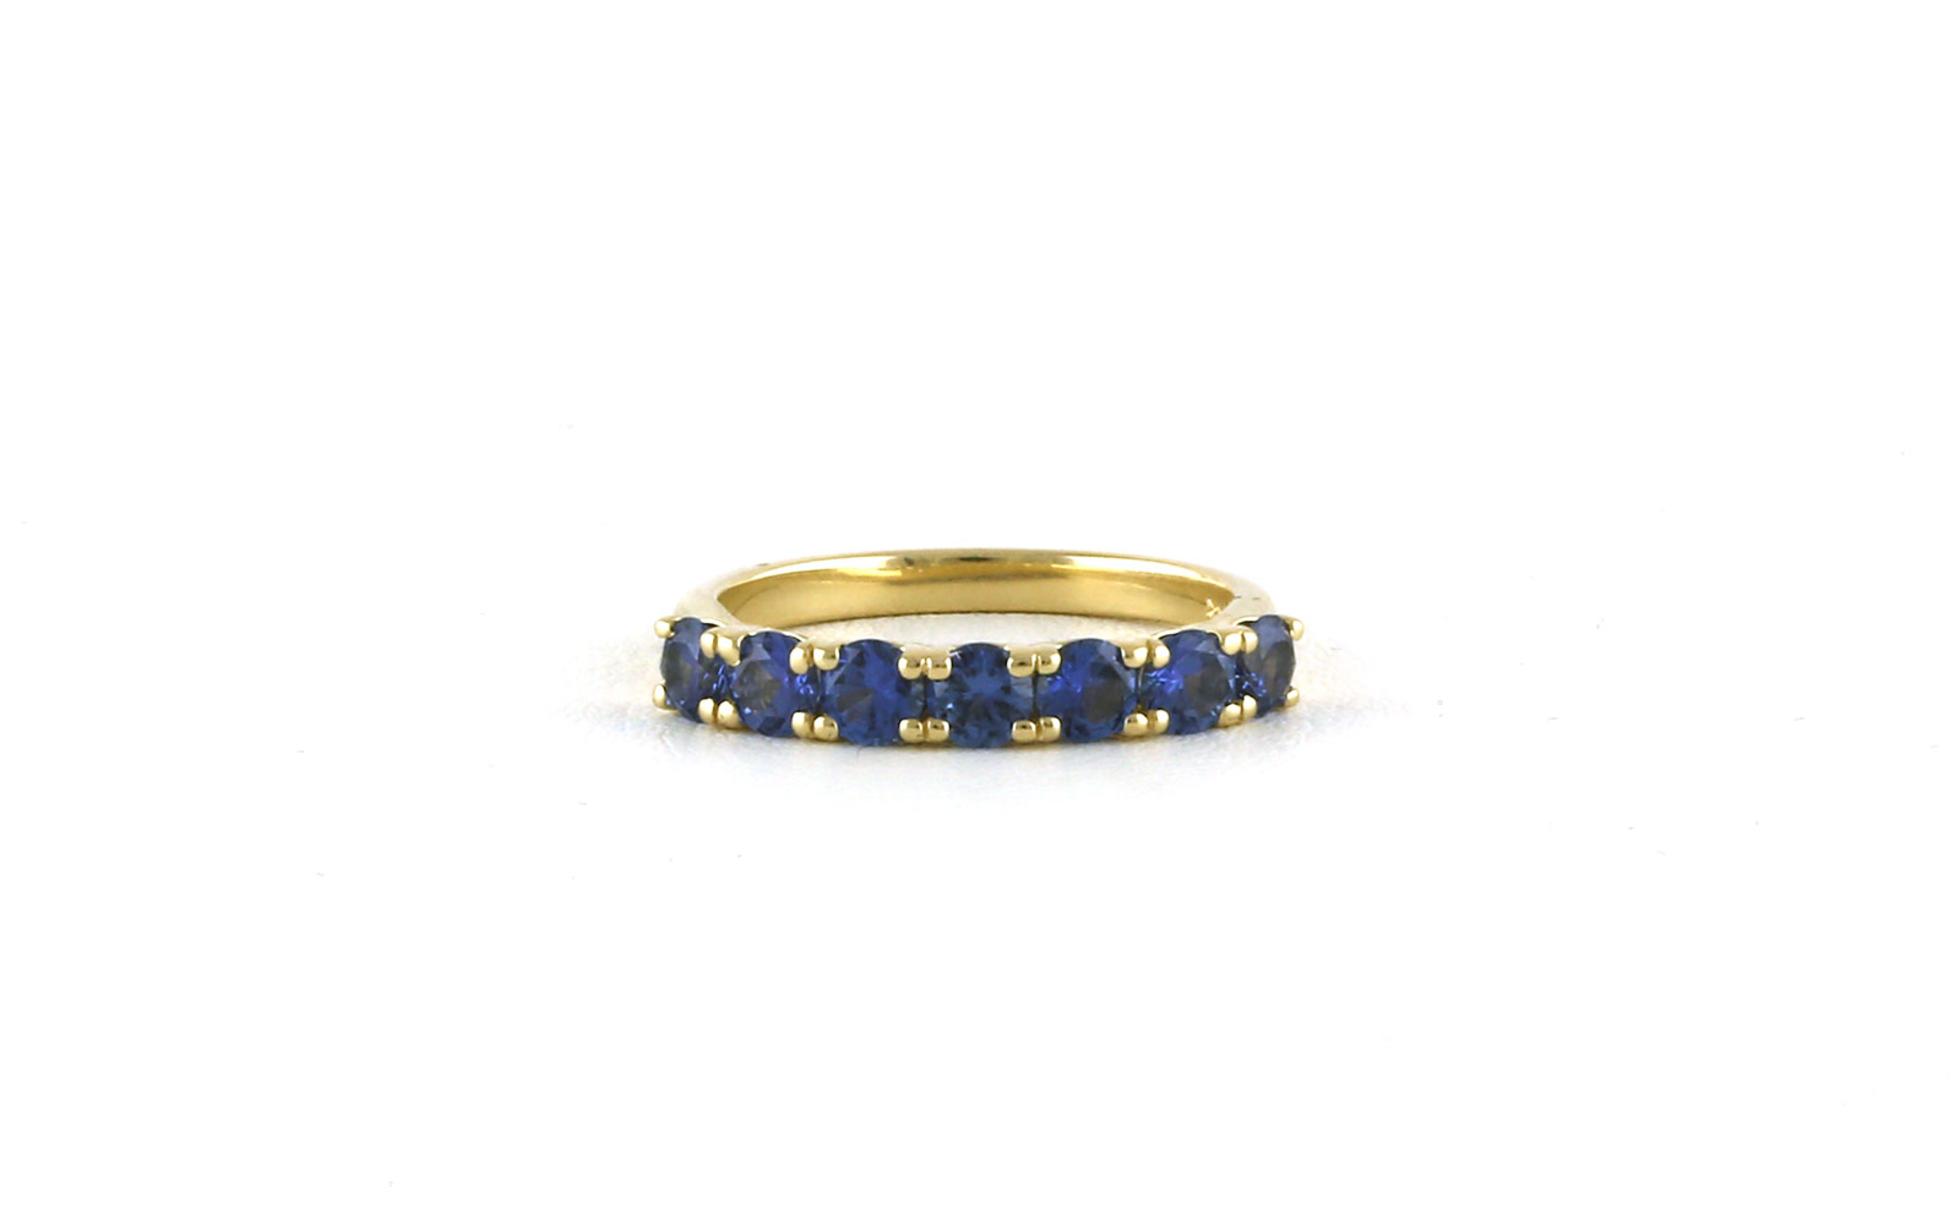 7-Stone Montana Yogo Sapphire Band in Yellow Gold (1.30cts TWT)